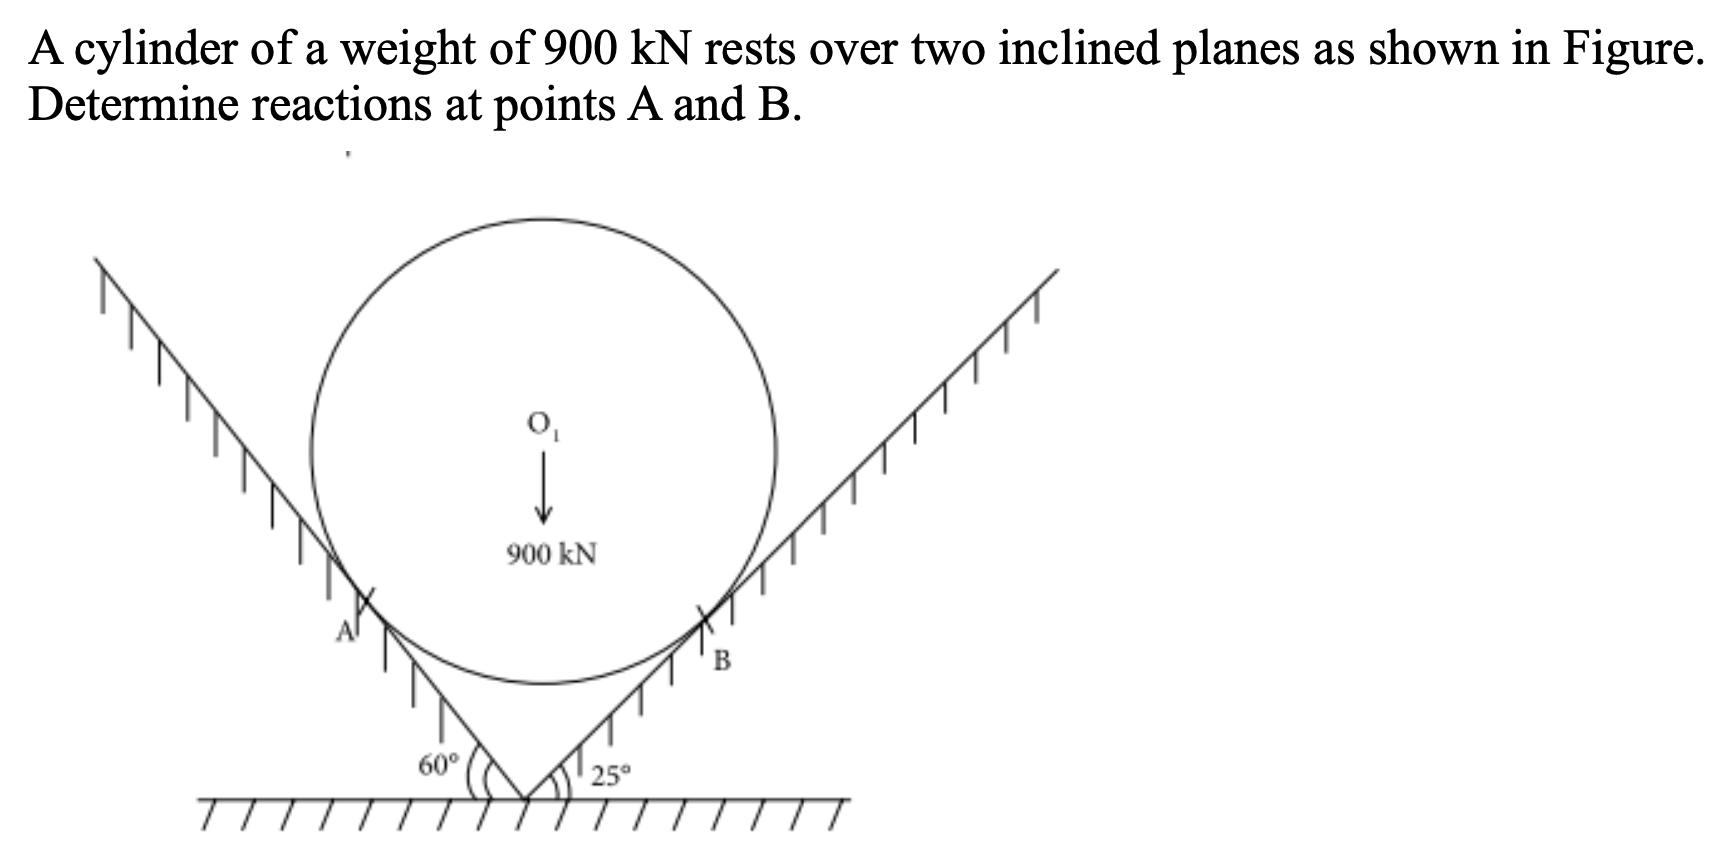 A cylinder of a weight of 900 kN rests over two inclined planes as shown in Figure. Determine reactions at